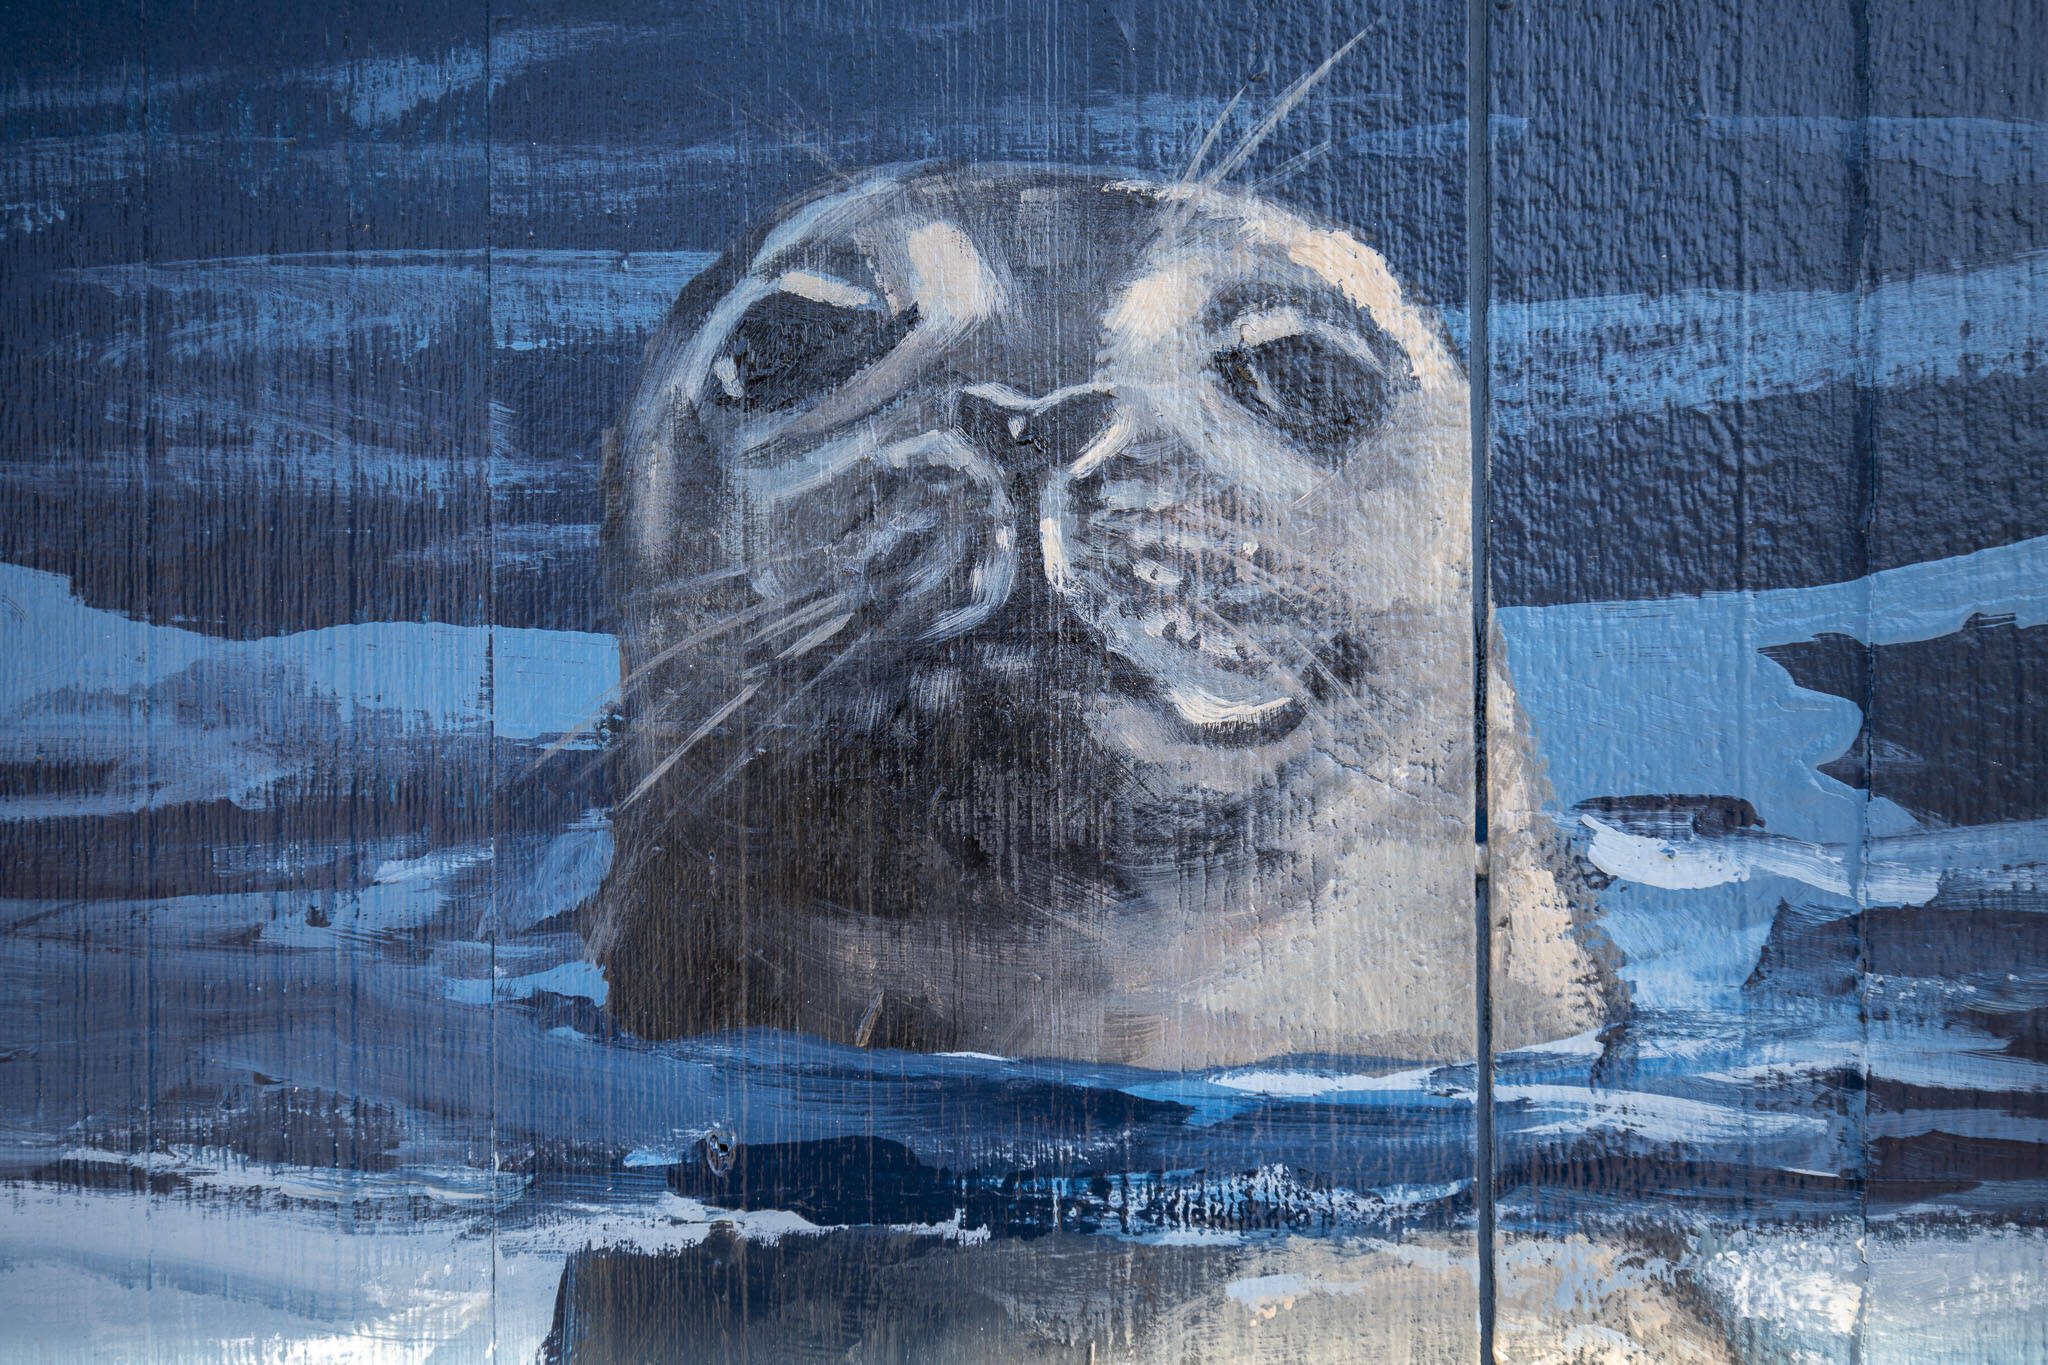 Downtown Everett mural brings wild animals, marine creatures to life |...